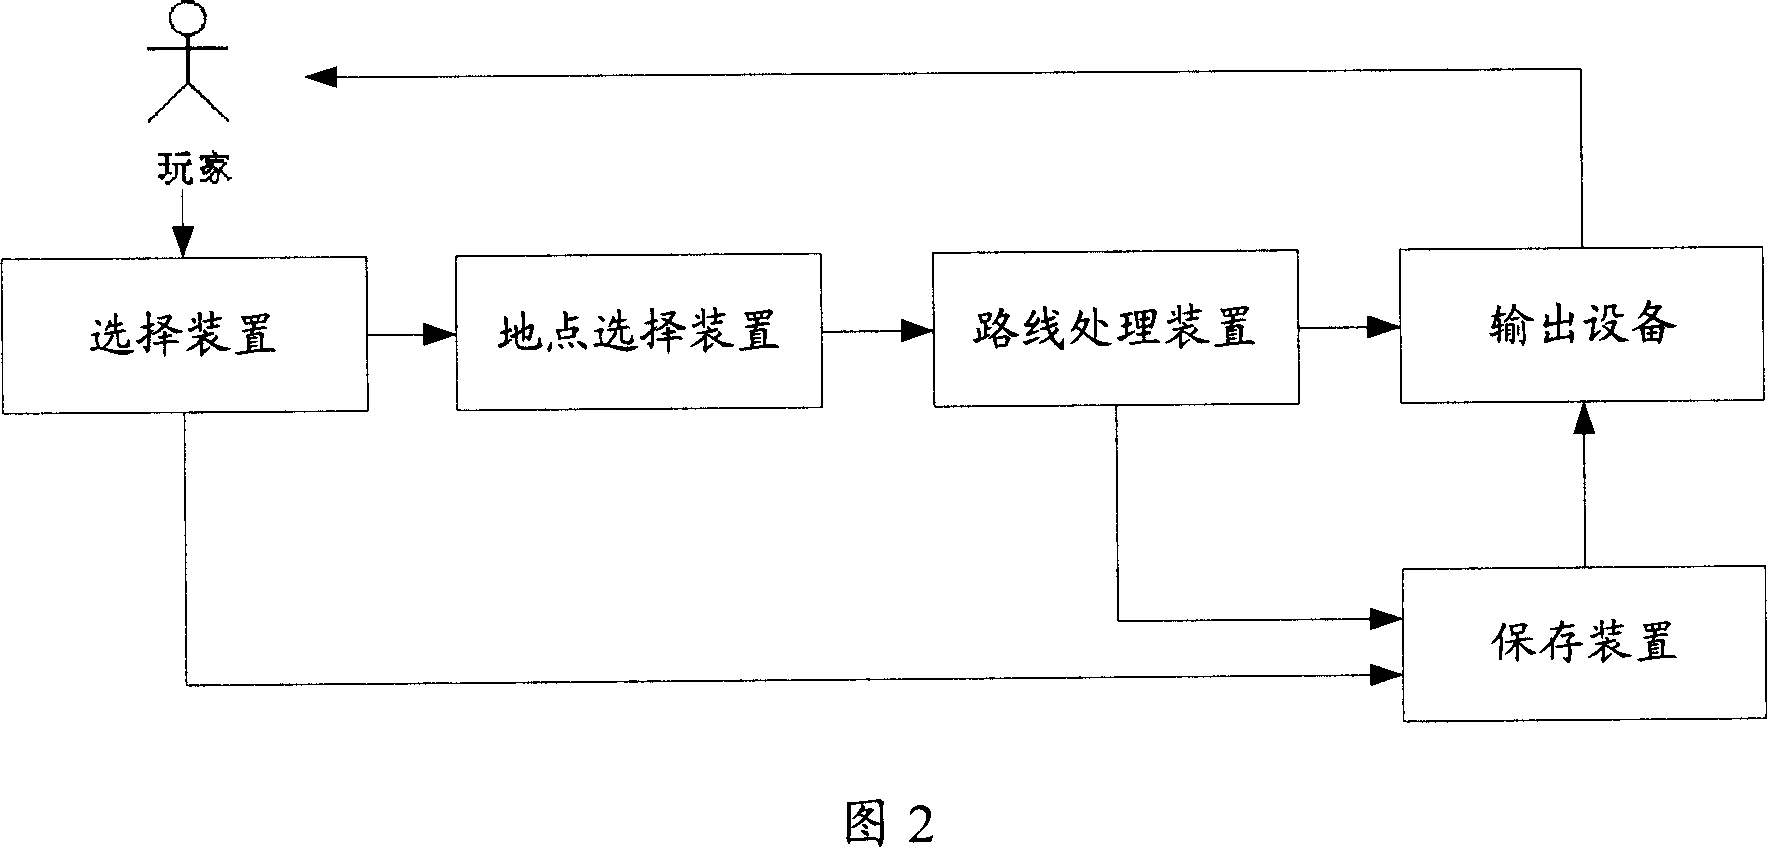 System and method for obtaining inter-two-point path in network game